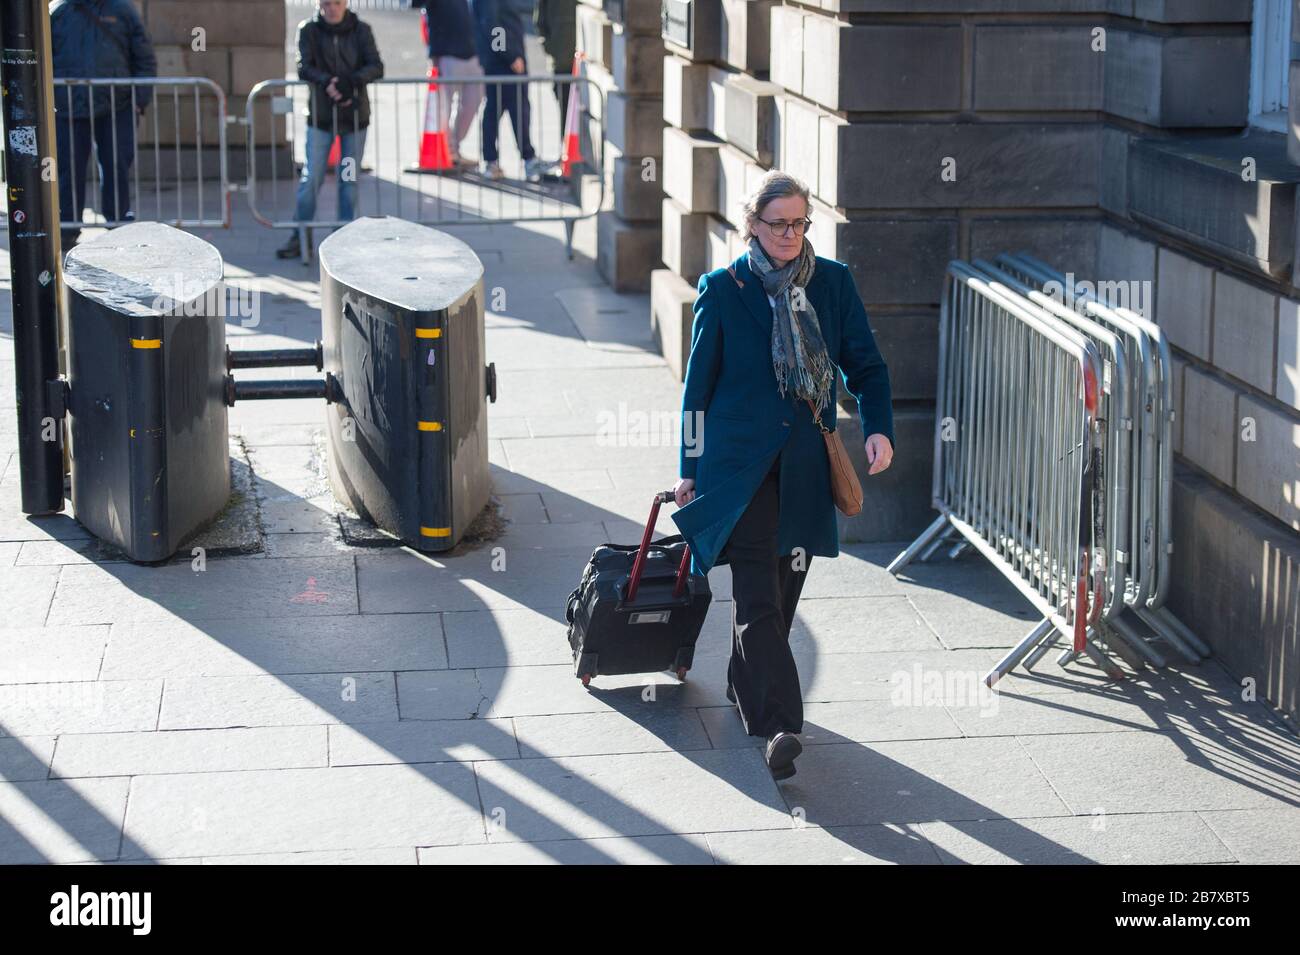 Edinburgh, UK. 18th Mar, 2020. Pictured: Shelagh McCall QC - Junior defence counsel. A packed crowd consisting of awaiting Media, Press photographers and onlookers wait for him outside of the court. Credit: Colin Fisher/Alamy Live News Stock Photo